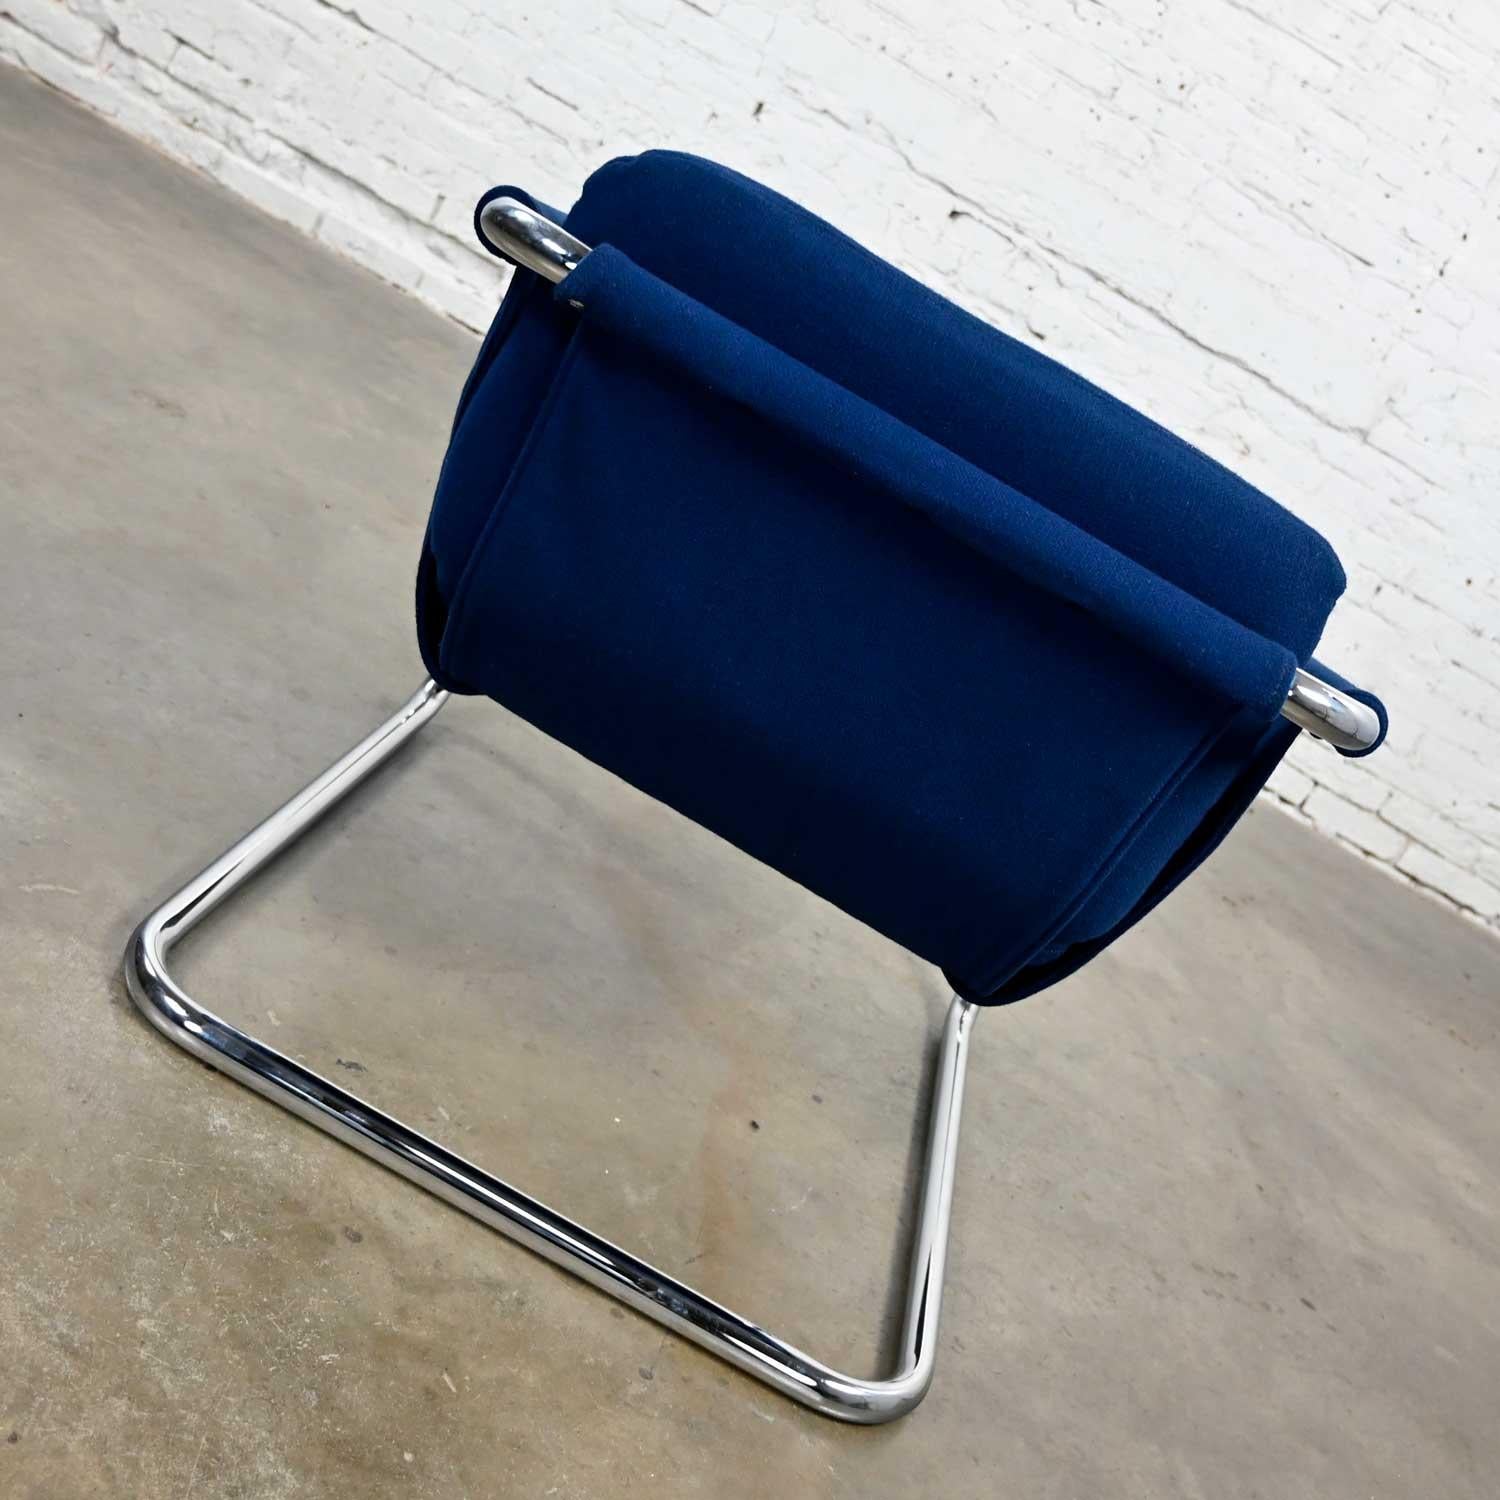 Fabric Vintage Modern Royal Blue Hopsacking & Chrome Cantilever Sling Chair For Sale